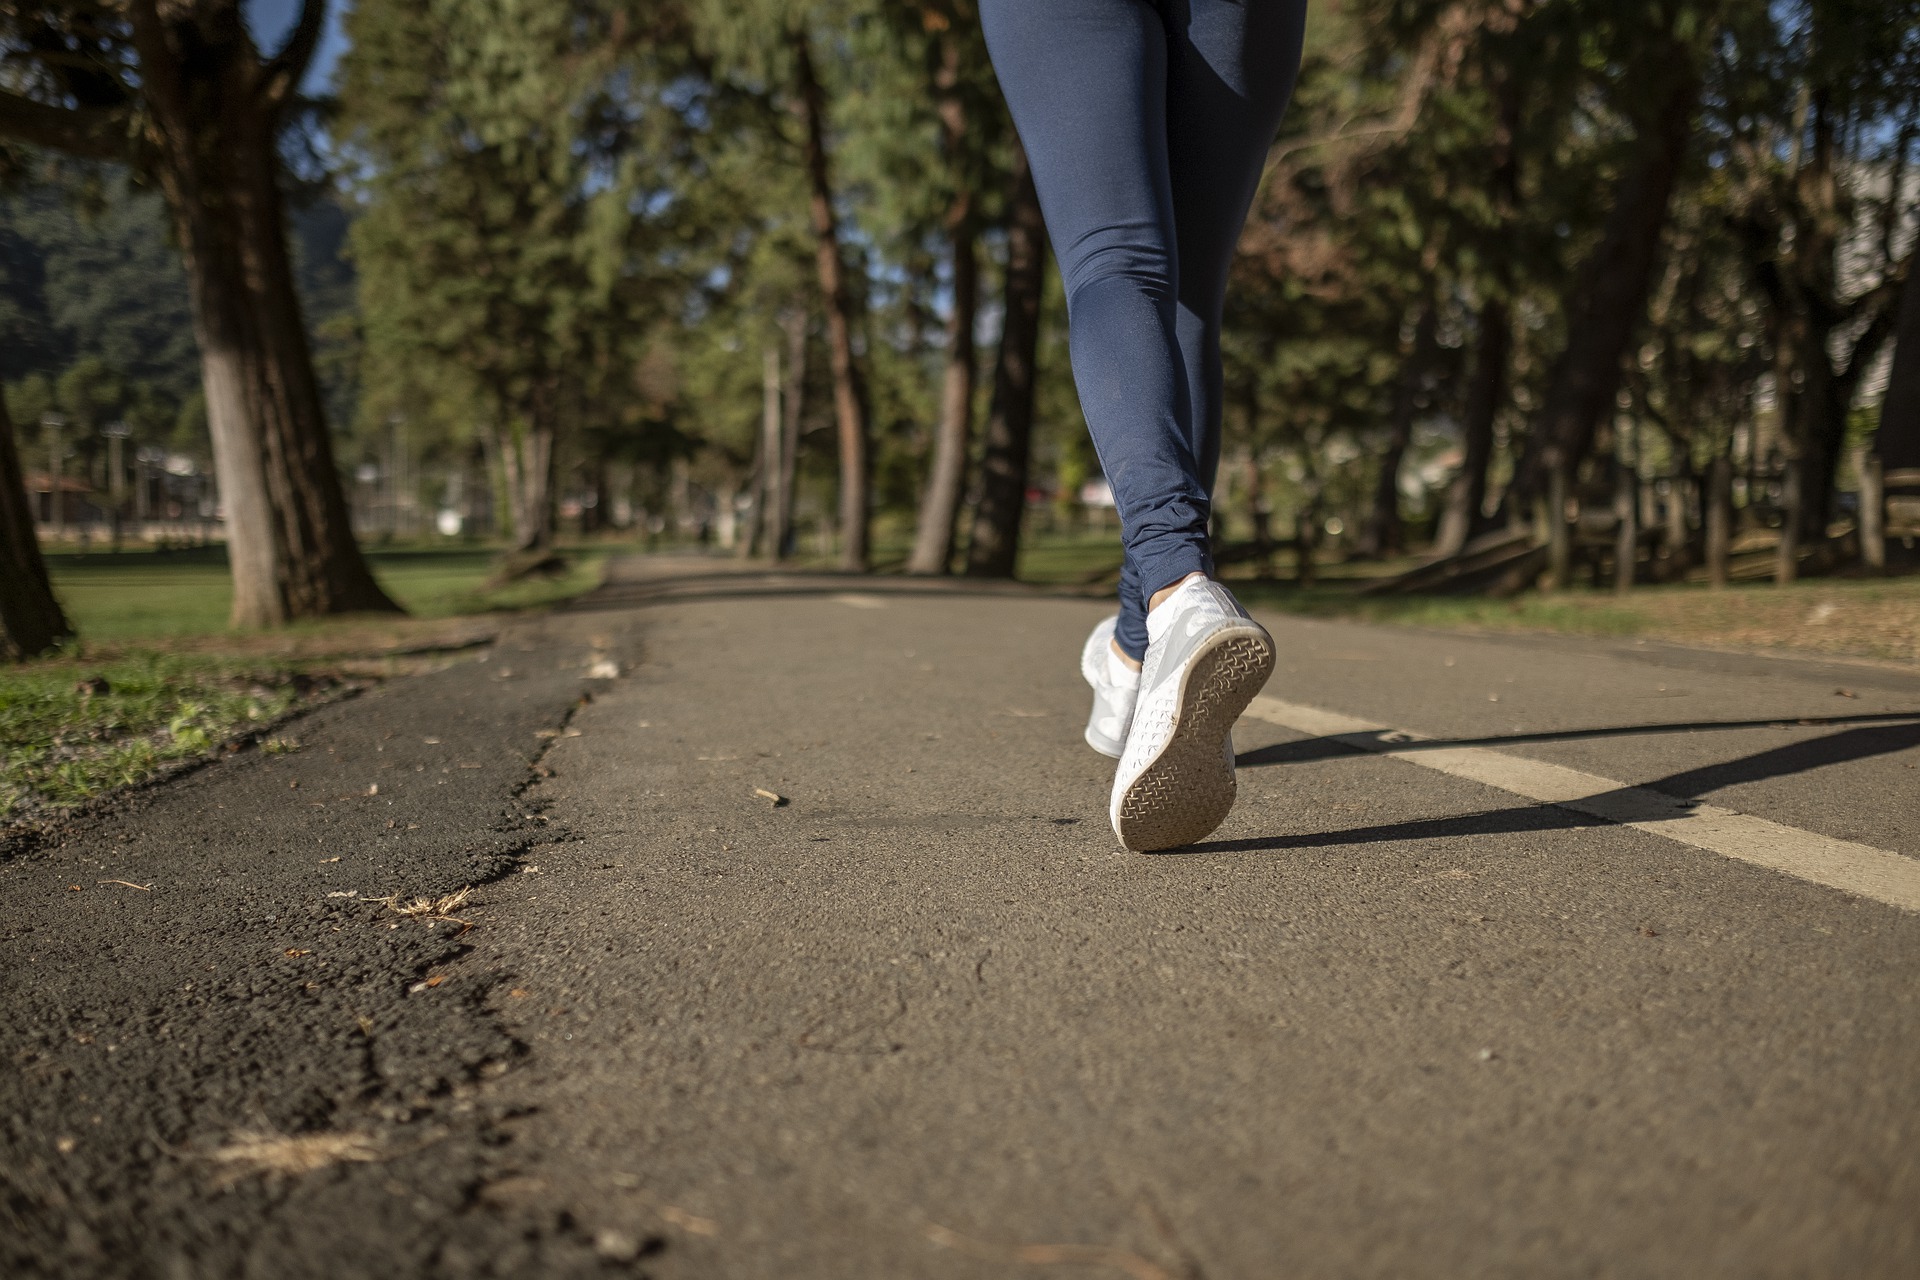 Photo: A person's legs are pictured jogging along a paved path through trees. Photo courtesy of Fotorech via Pixabay.